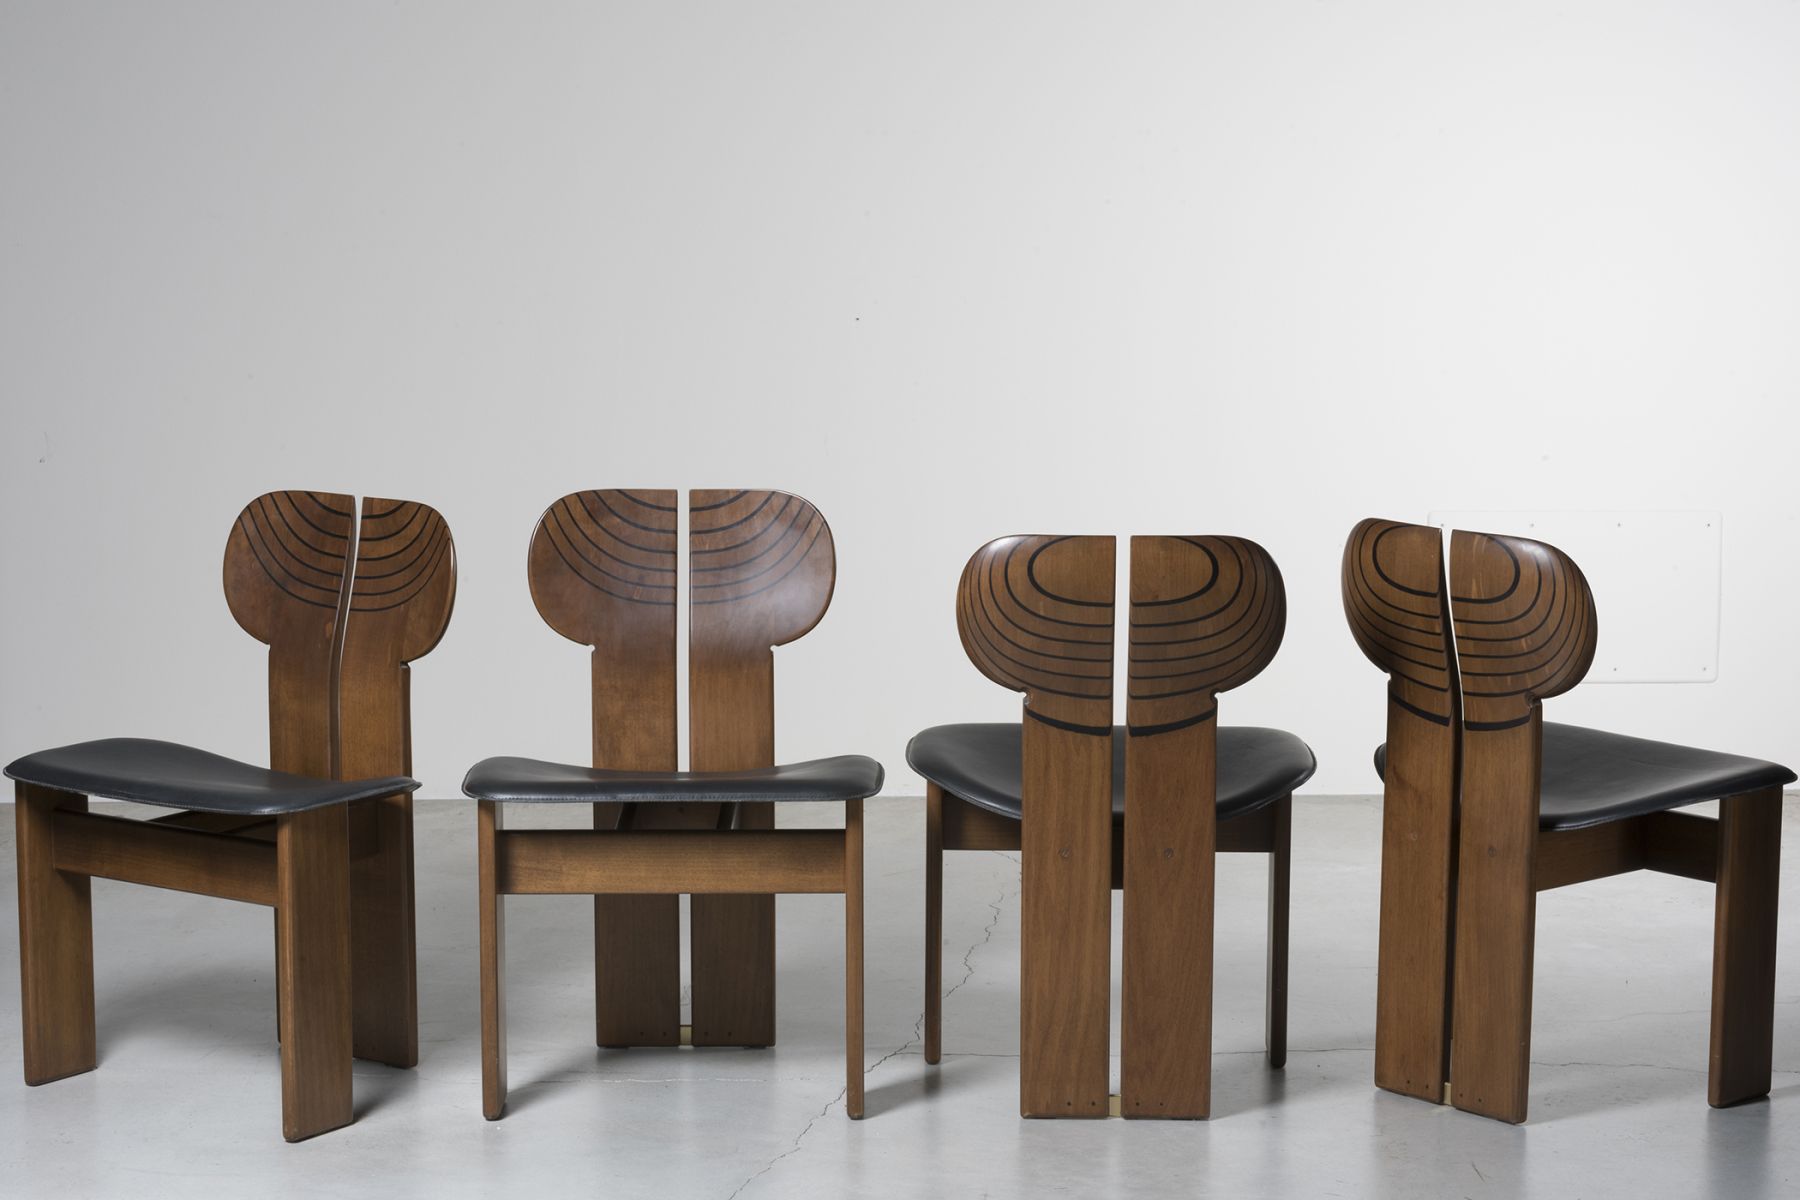 Chair mod. Africa, Artona series Afra and Tobia Scarpa pic-3